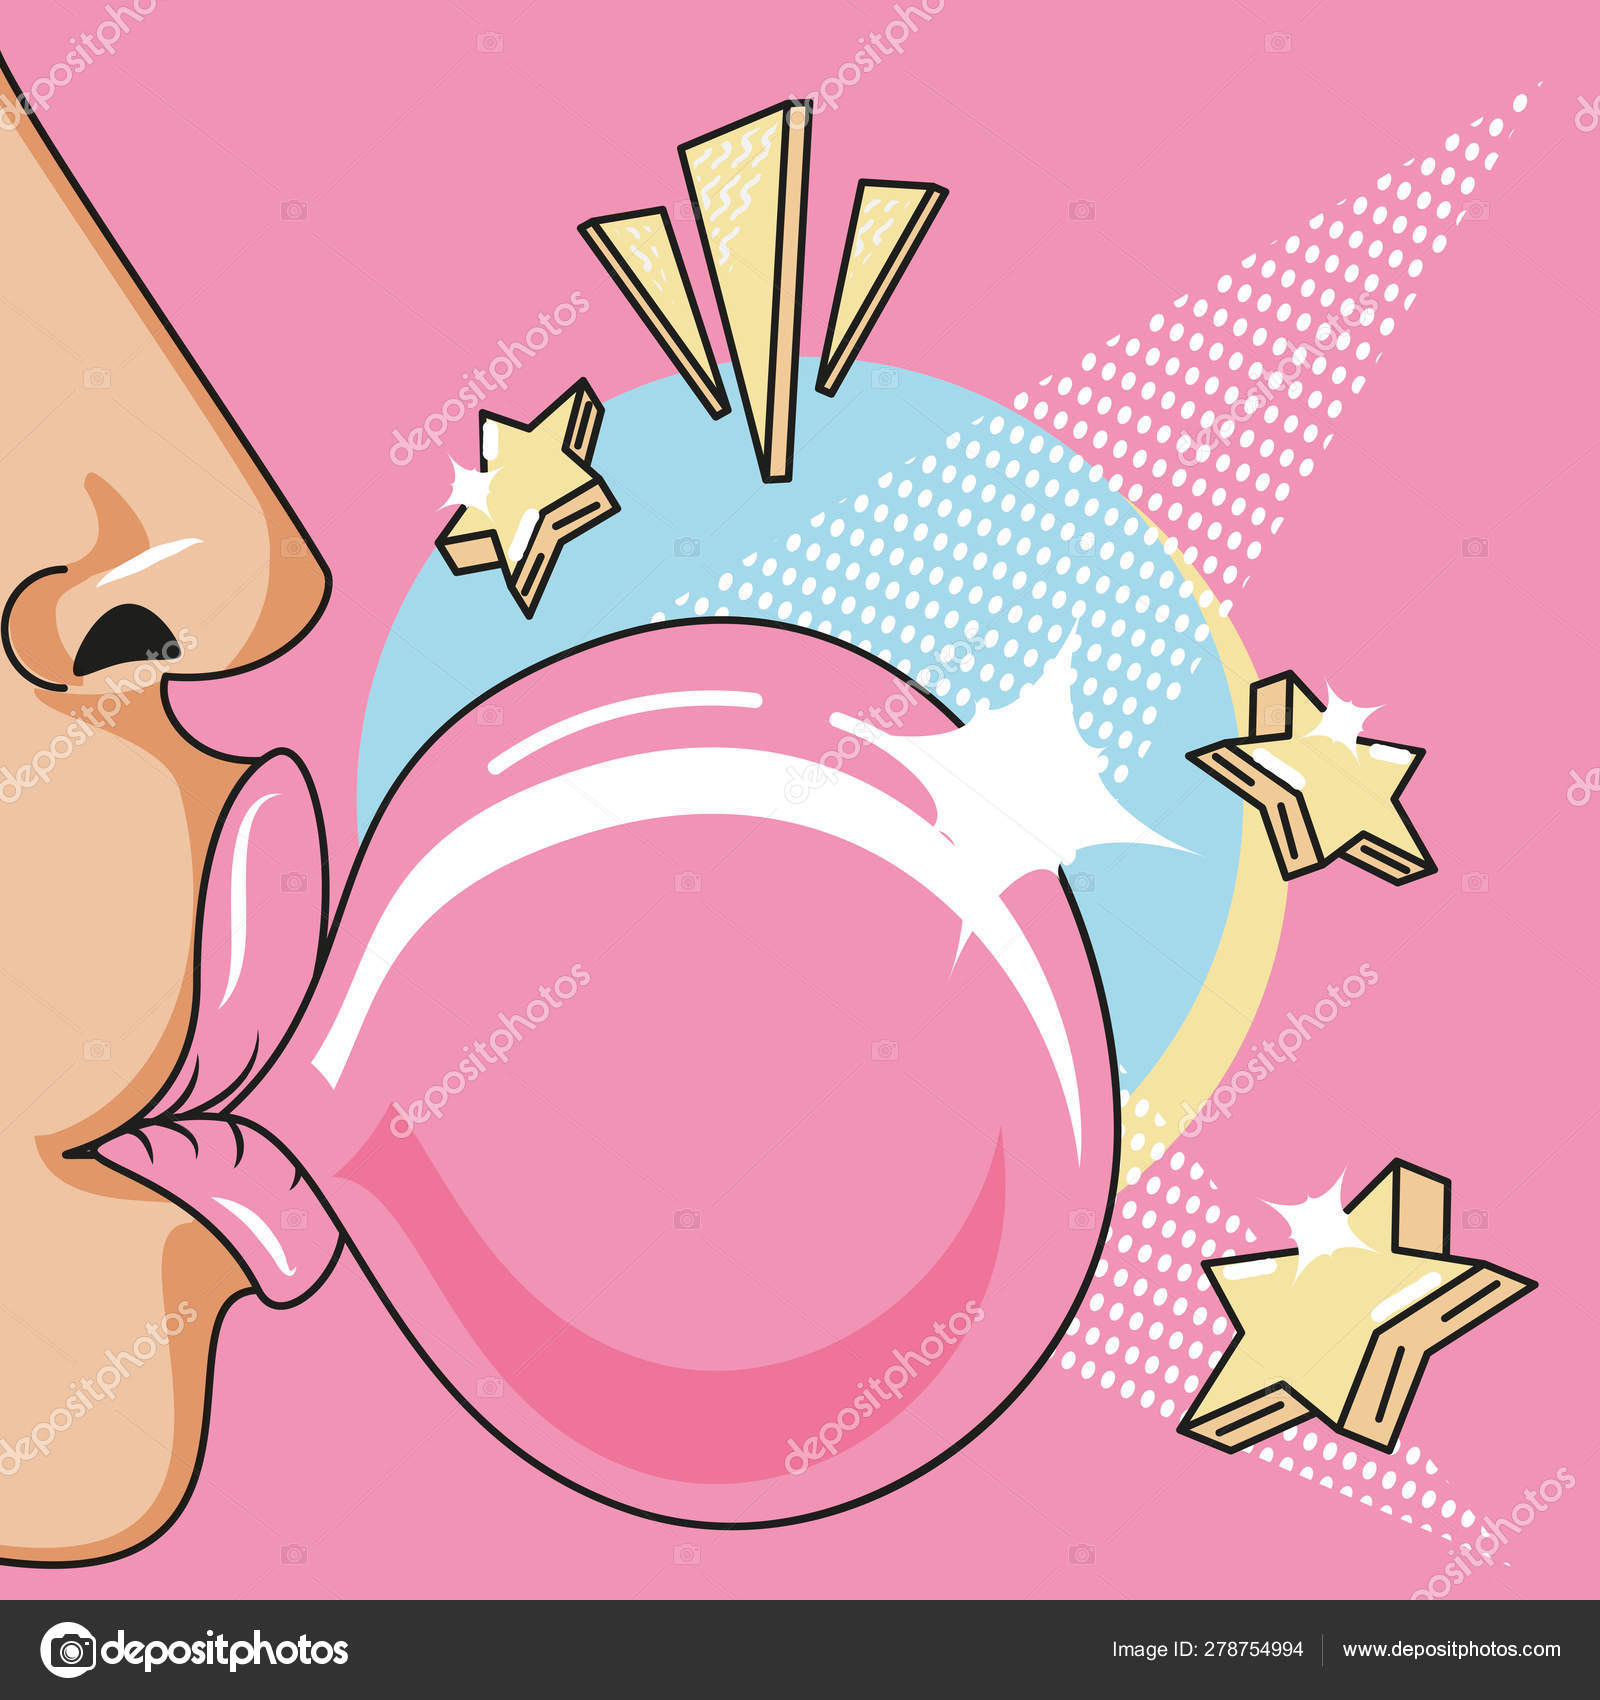 Woman Blowing Bubble With A Pink Bubble Gum And Pop Speech Bubble